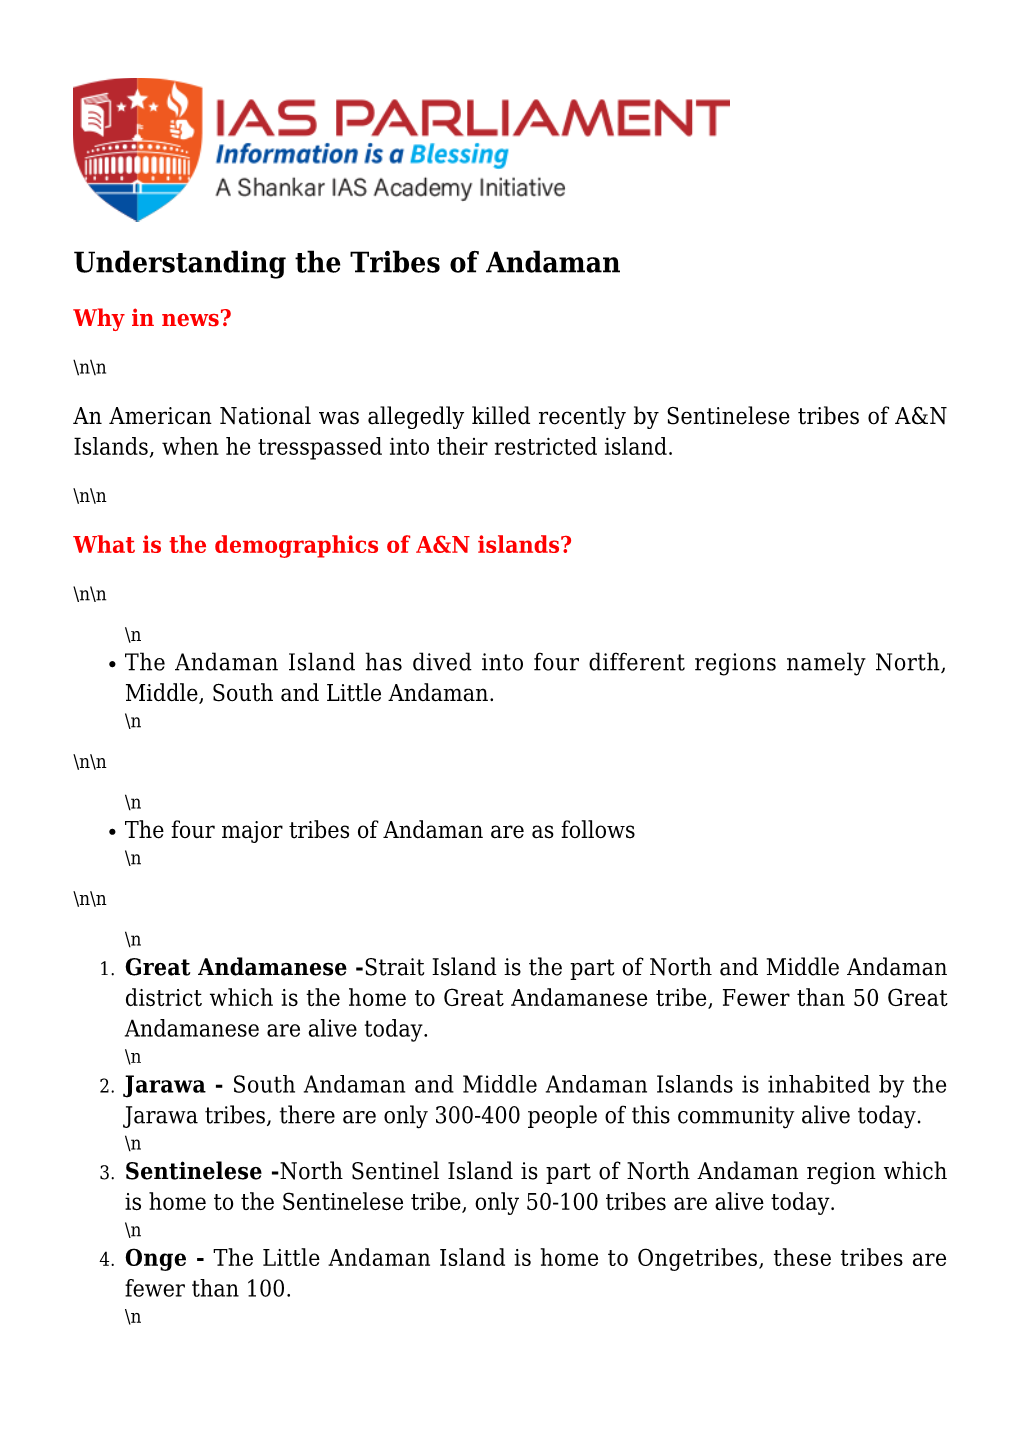 Understanding the Tribes of Andaman